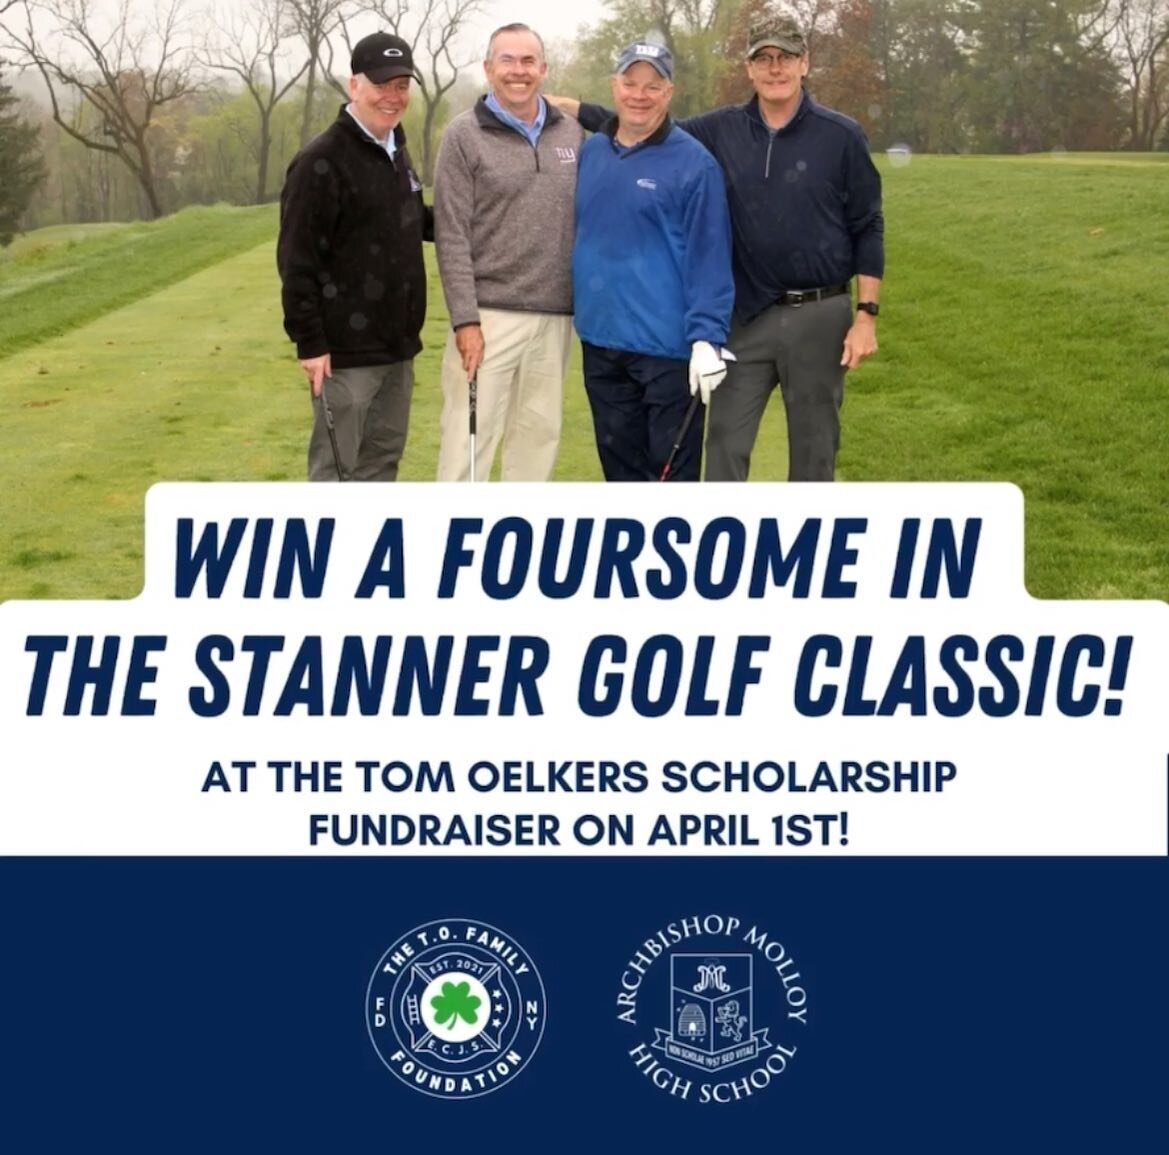 Win a foursome at the Annual Stanner Golf Classic on April 1st at the Tom Oelkers Scholarship Fundraiser! 🏌️⛳️💙

Join us at One Station Plaza in Bayside- Open Bar &amp; Food 
$75 per person | Cash entrance at the door!

Funds raised go to the Tom O